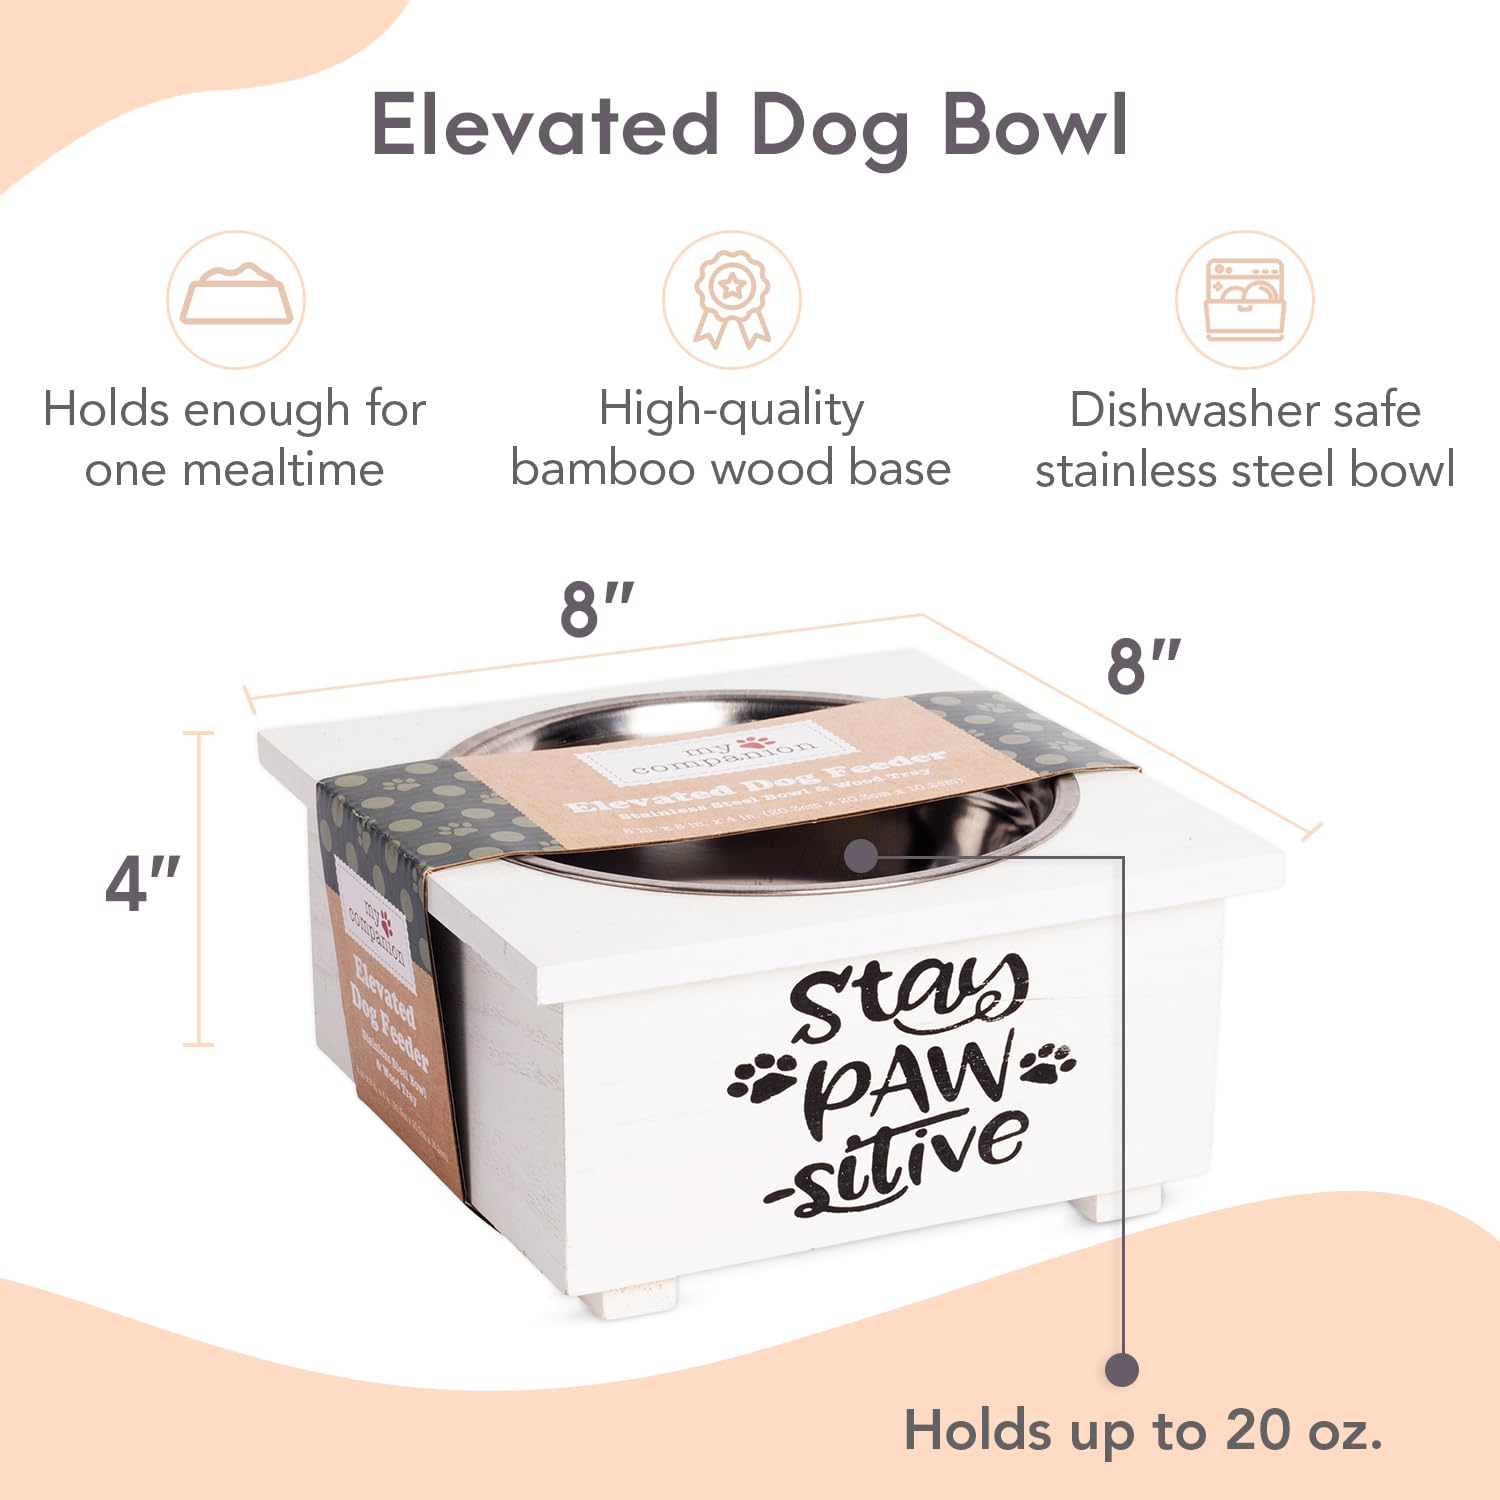 MosJos Elevated Feeding Pet Bowl - Dog, Puppy Supplies, Water Feeder with Stainless Steel Anti Slip Feet Tray, 8� Pet Bowl Features Black Text Design, for Pets and Puppies. Dishwasher Safe.  - Like New